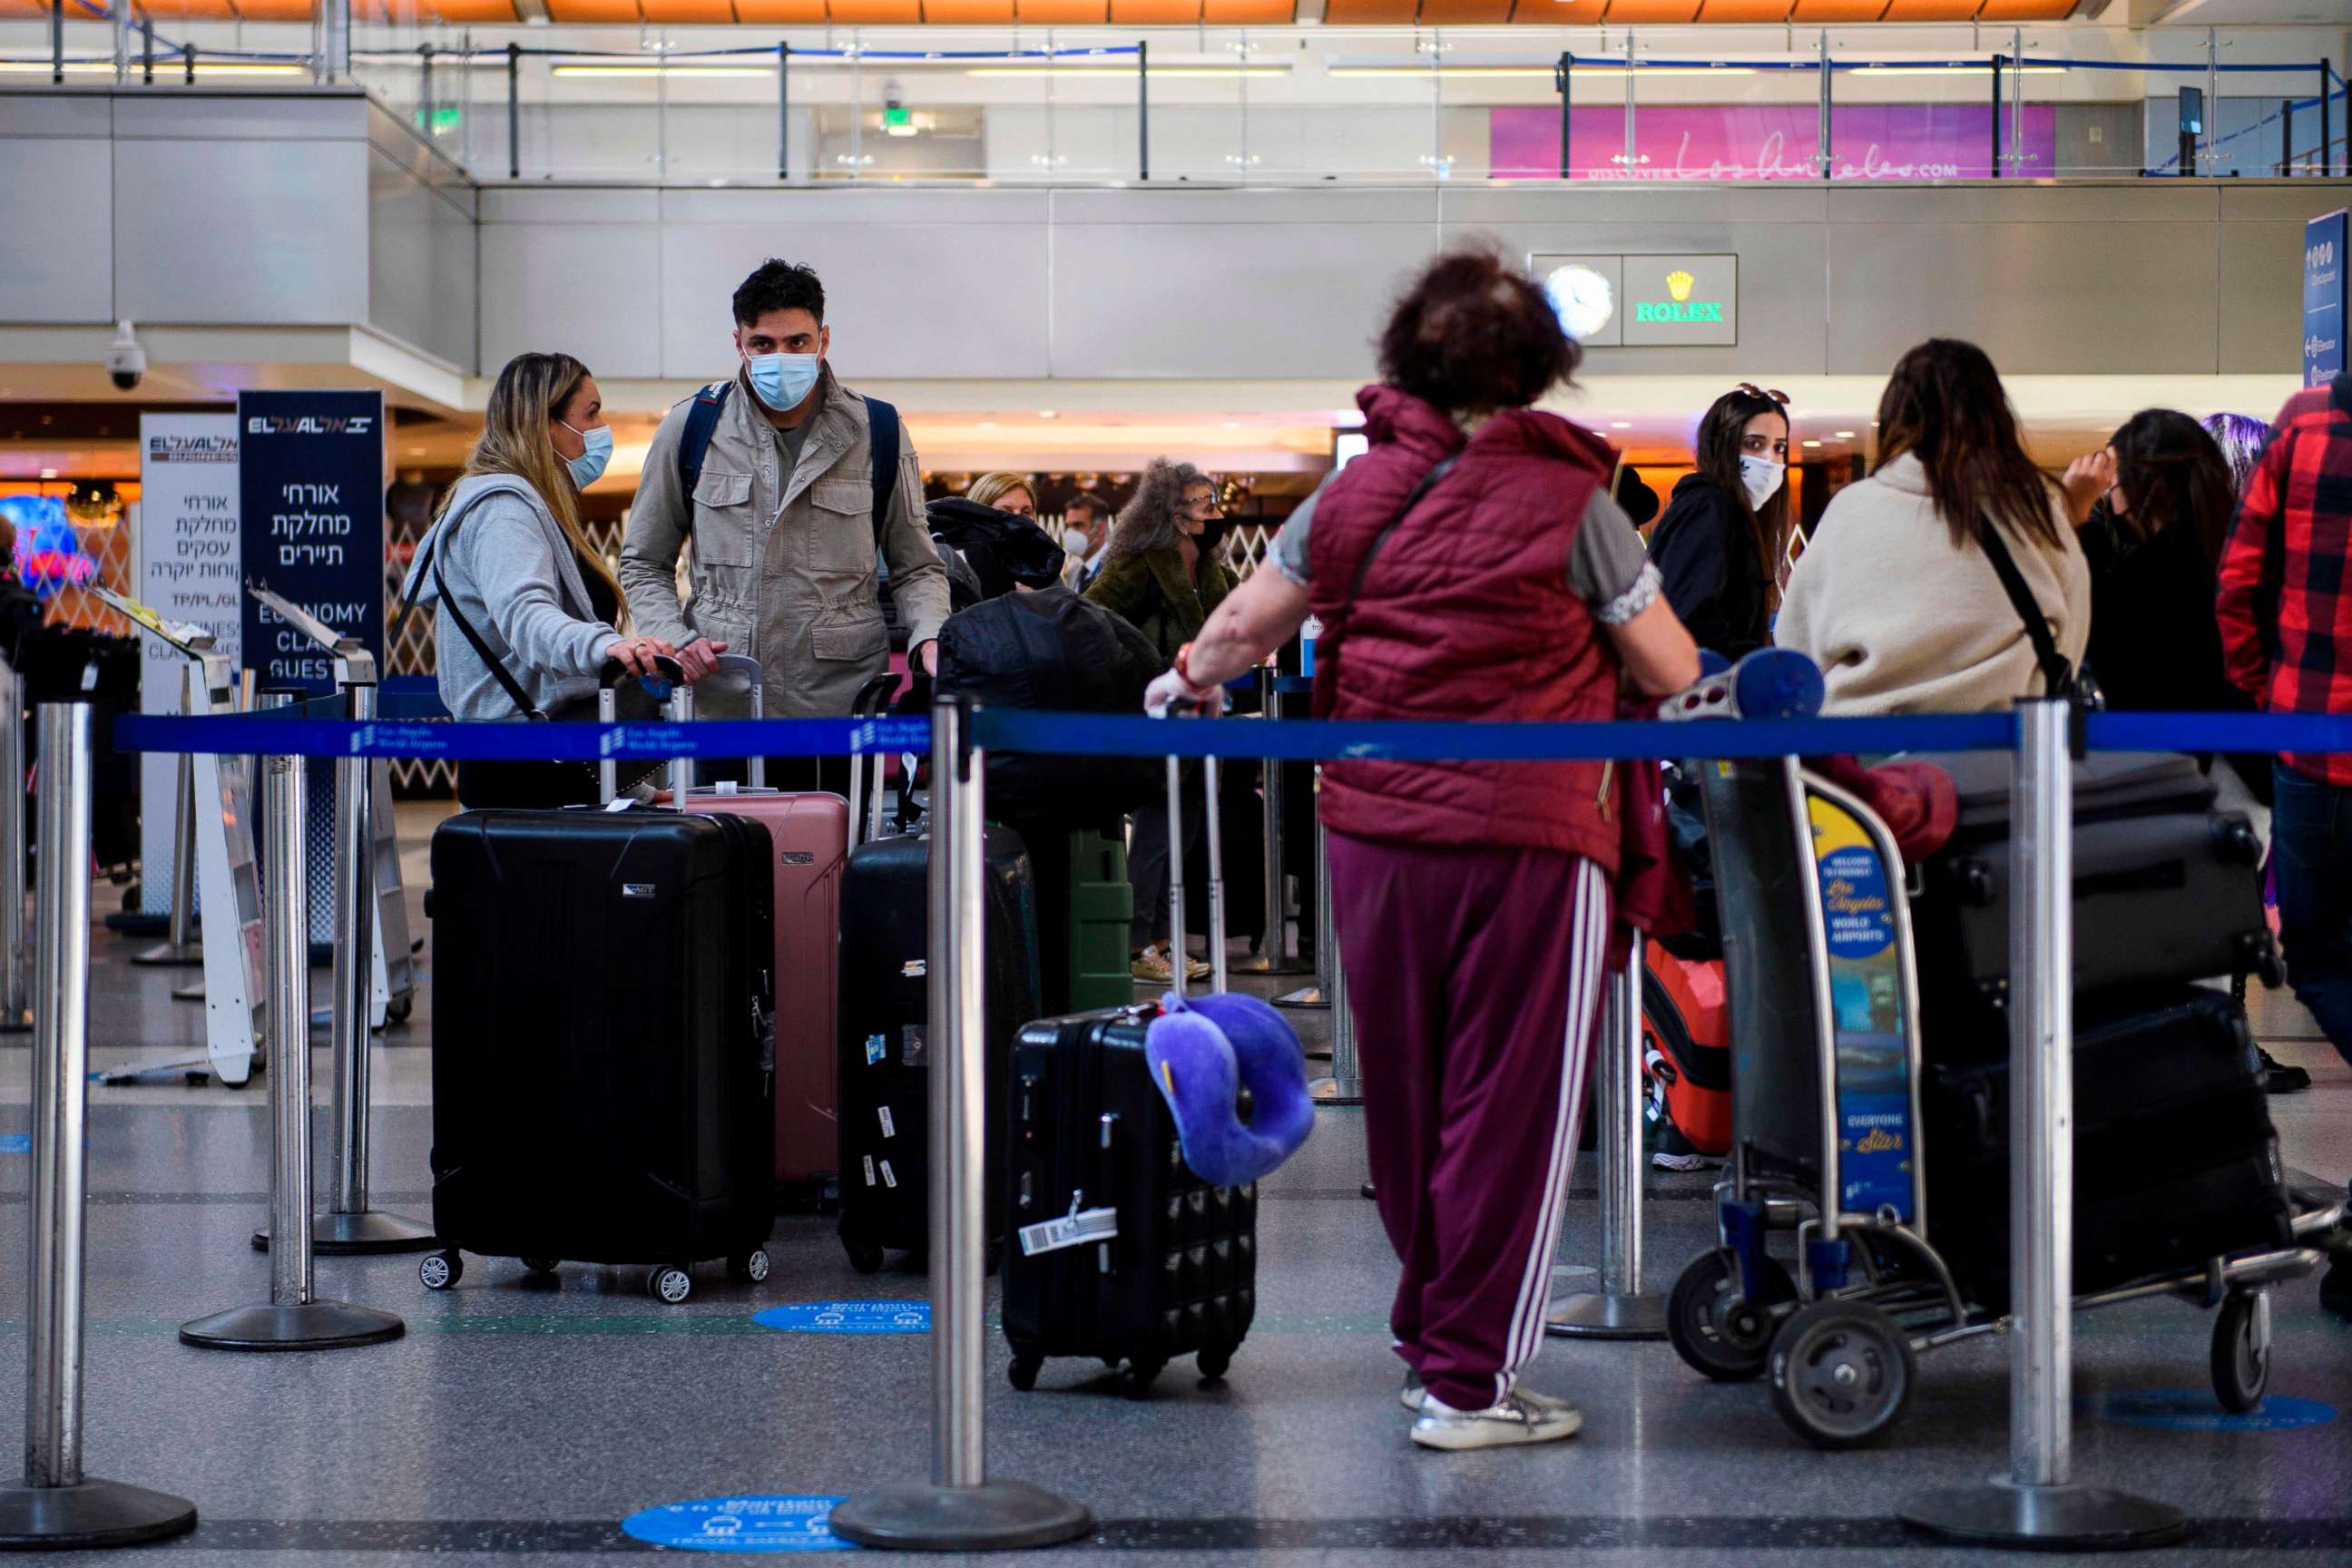 PHOTO: Travelers check-in for an El Al flight to Israel at Los Angeles International Airport (LAX) amid increased Covid-19 travel restrictions, Jan. 25, 2021 in Los Angeles.